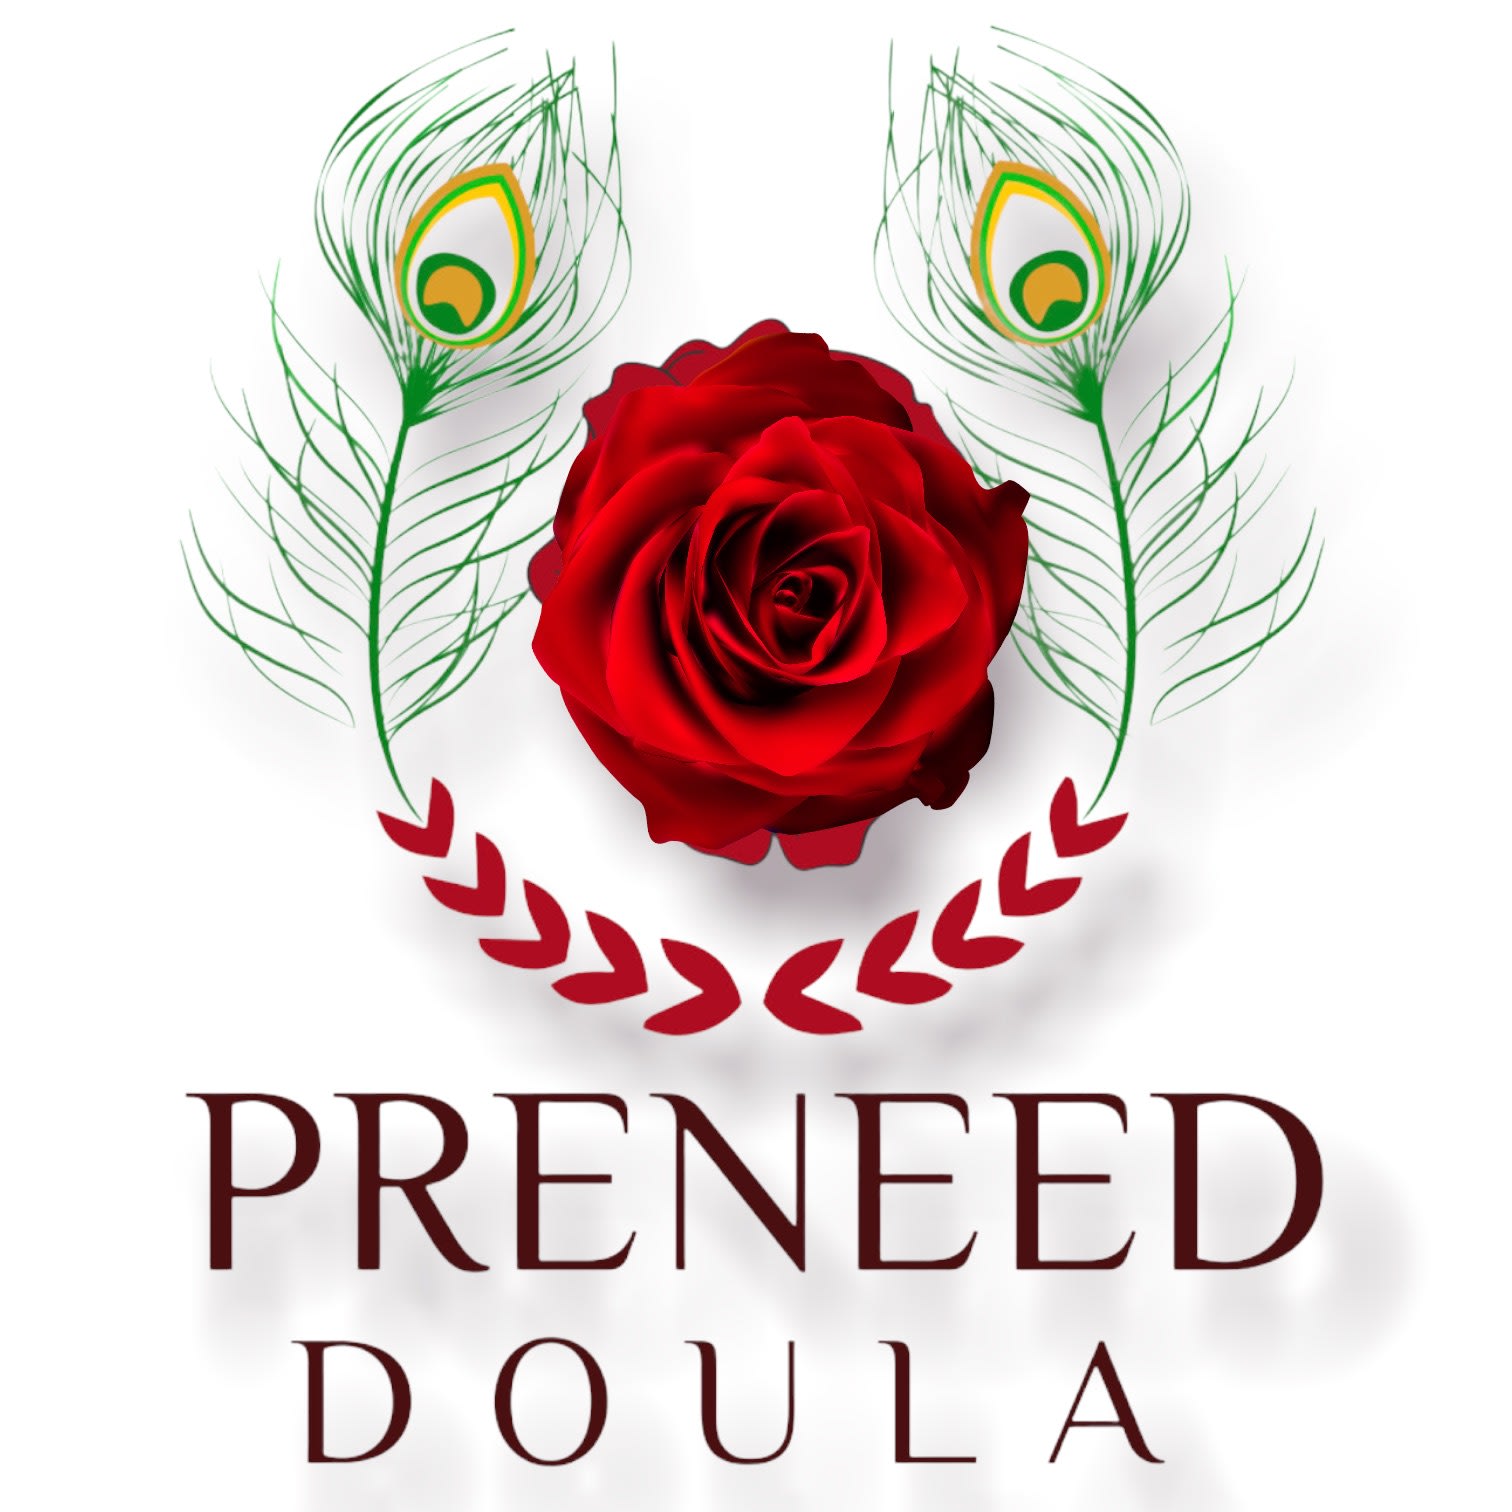 The PreNeed Doula